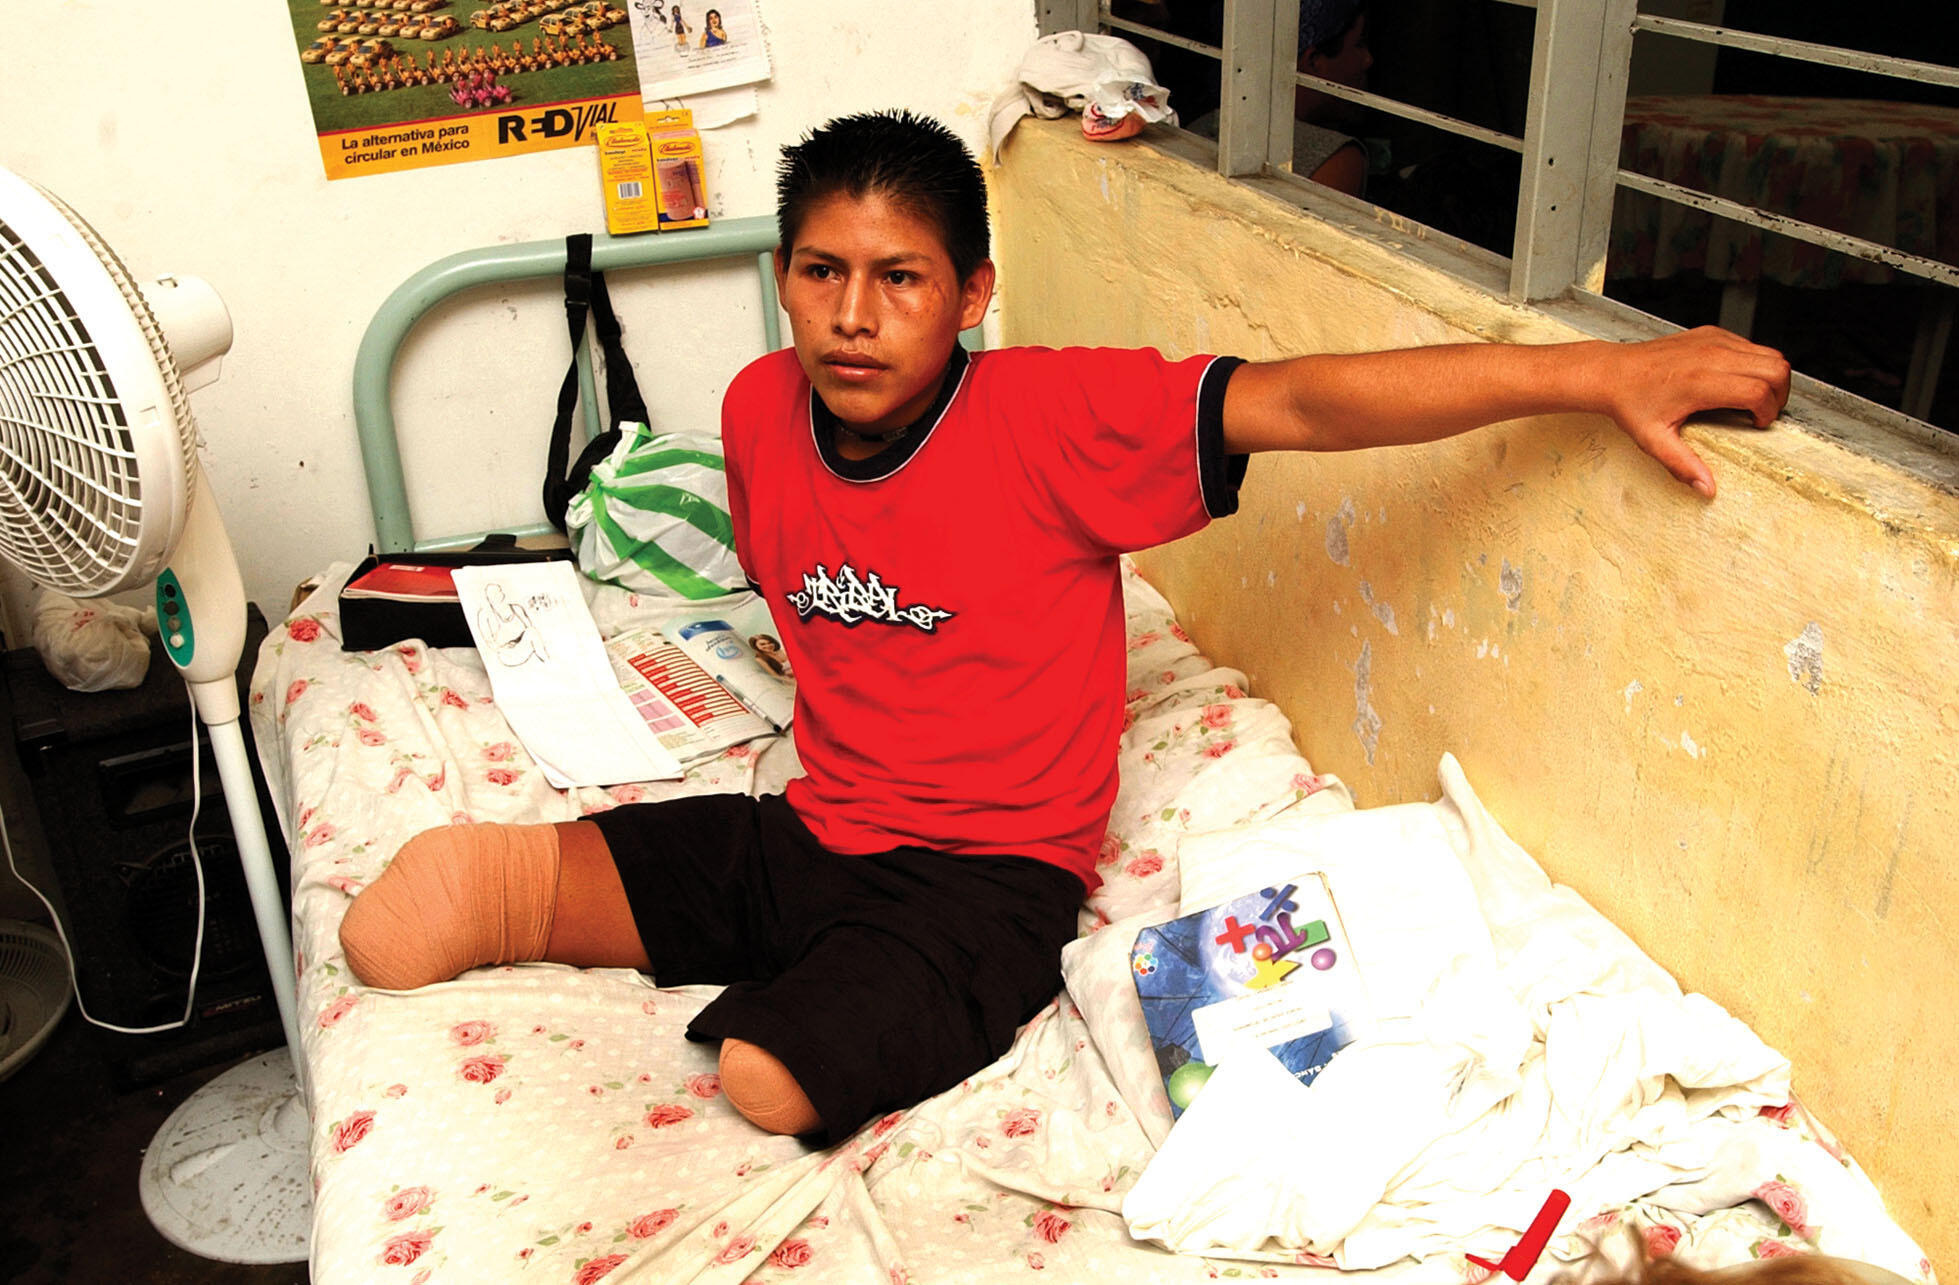 A young migrant who lost his legs when he fell from a train receives care in the Jesús El Buen Pastor shelter in Tapachula, Mexico. (Photo by Karl Gehring/Denver Post via Getty Images.)